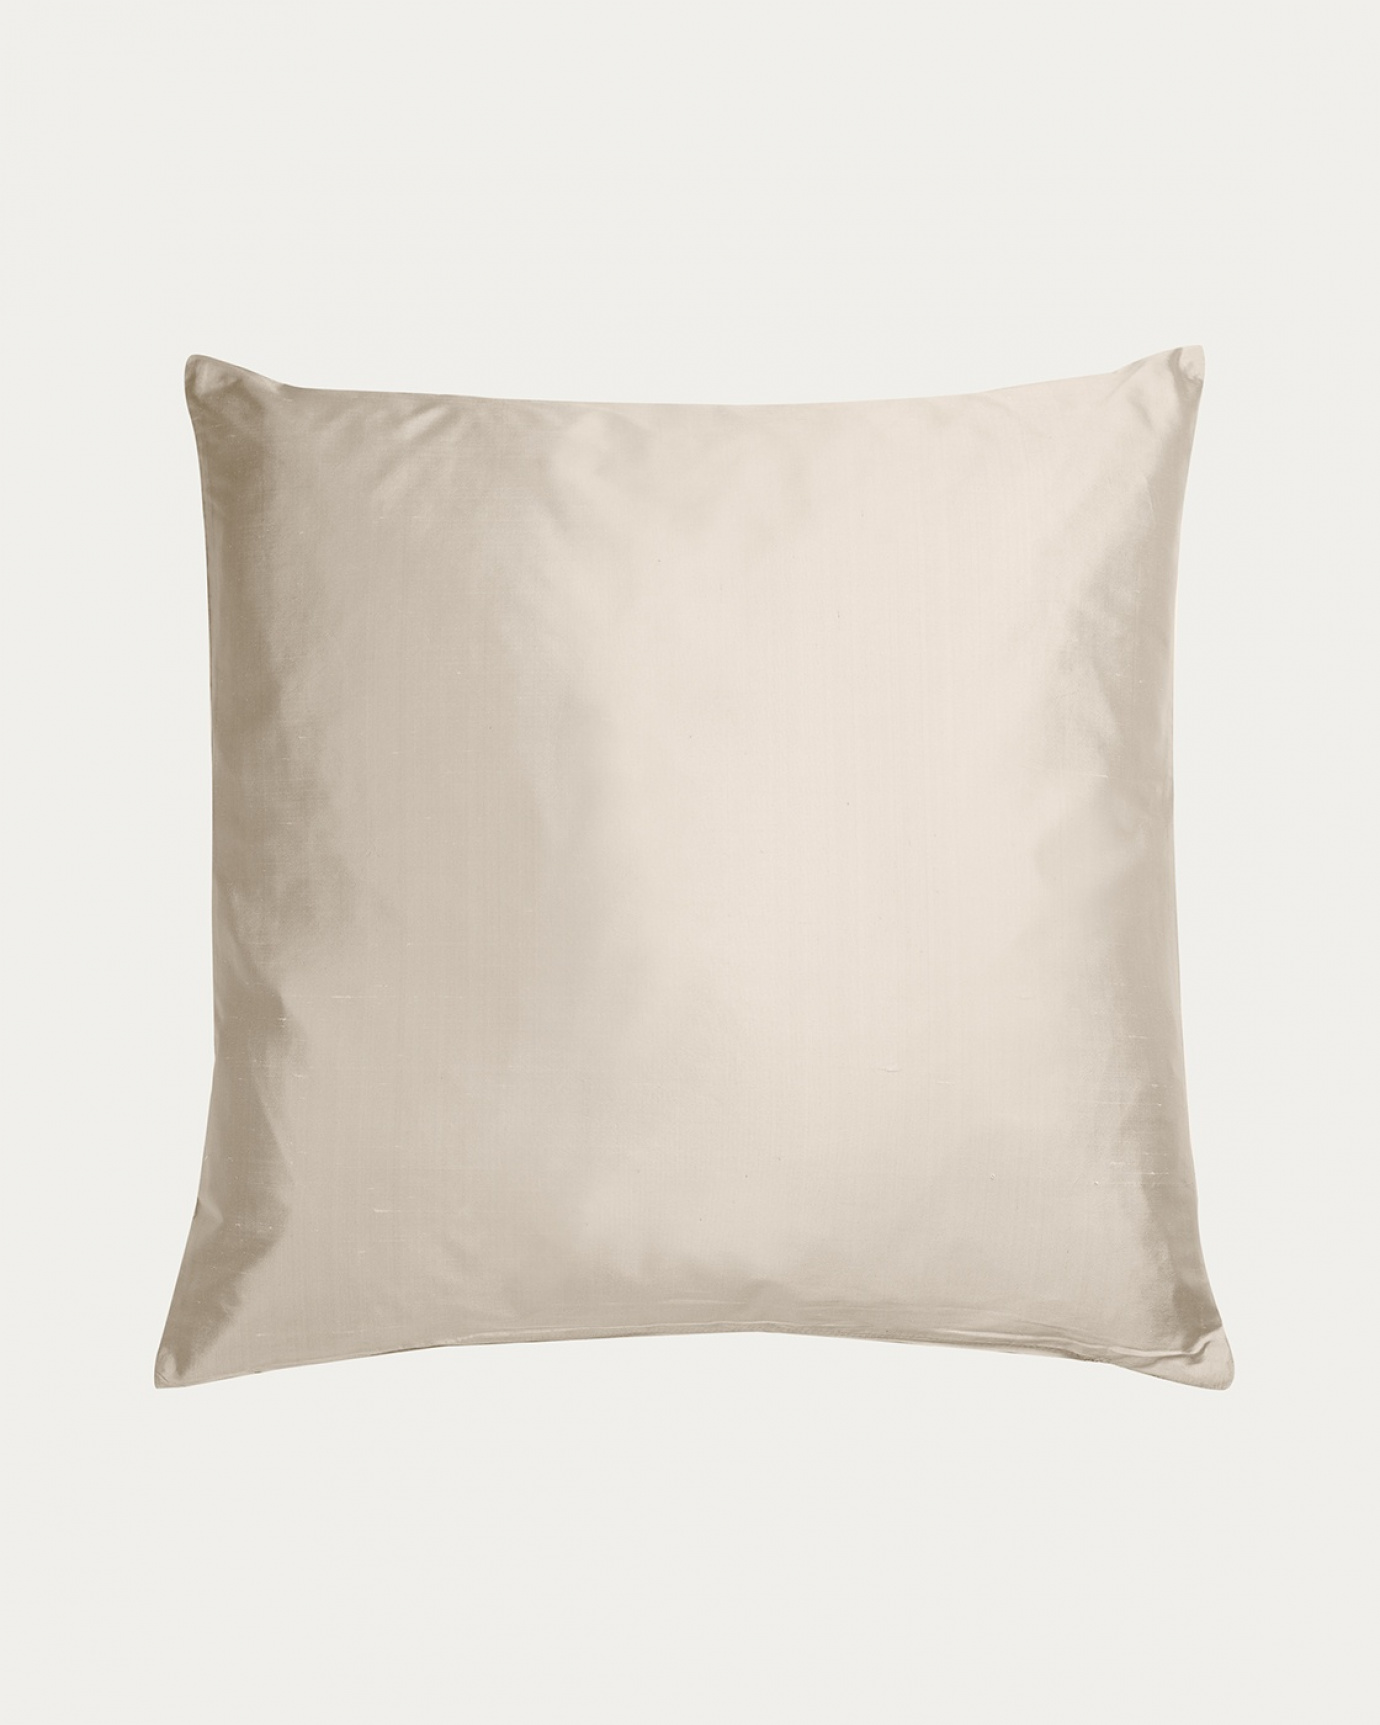 Product image light beige SILK cushion cover made of 100% dupion silk that gives a nice lustre from LINUM DESIGN. Size 50x50 cm.